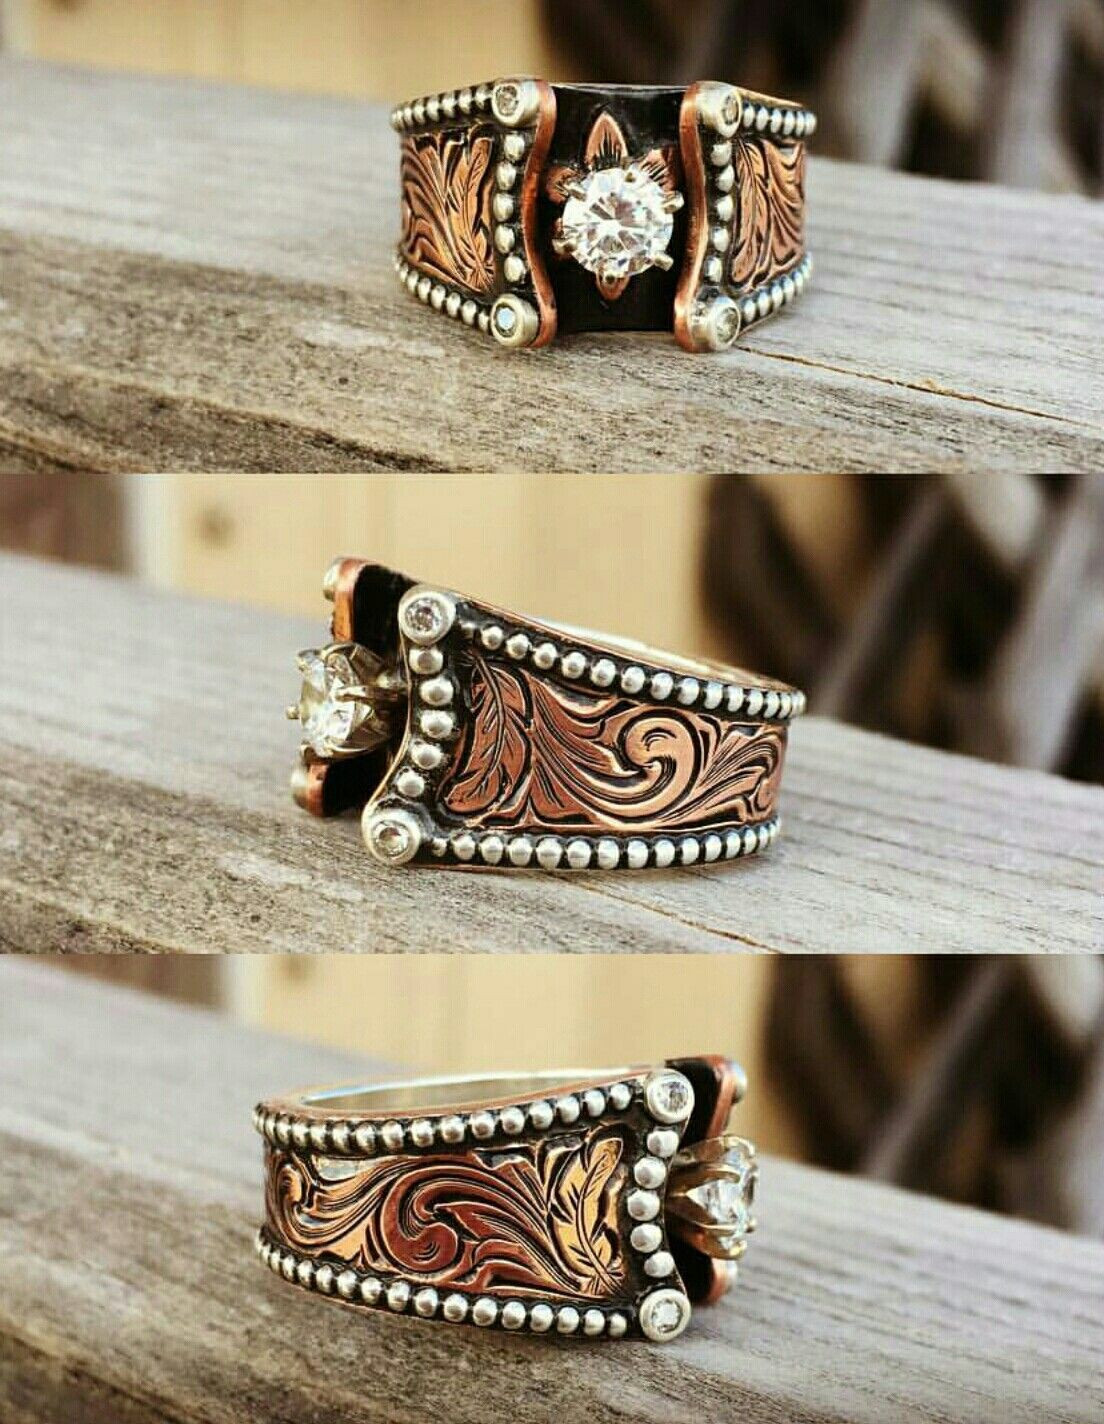 Cowboy Style Wedding Rings
 Kinda cool ring Absolutely beautiful custom copper and